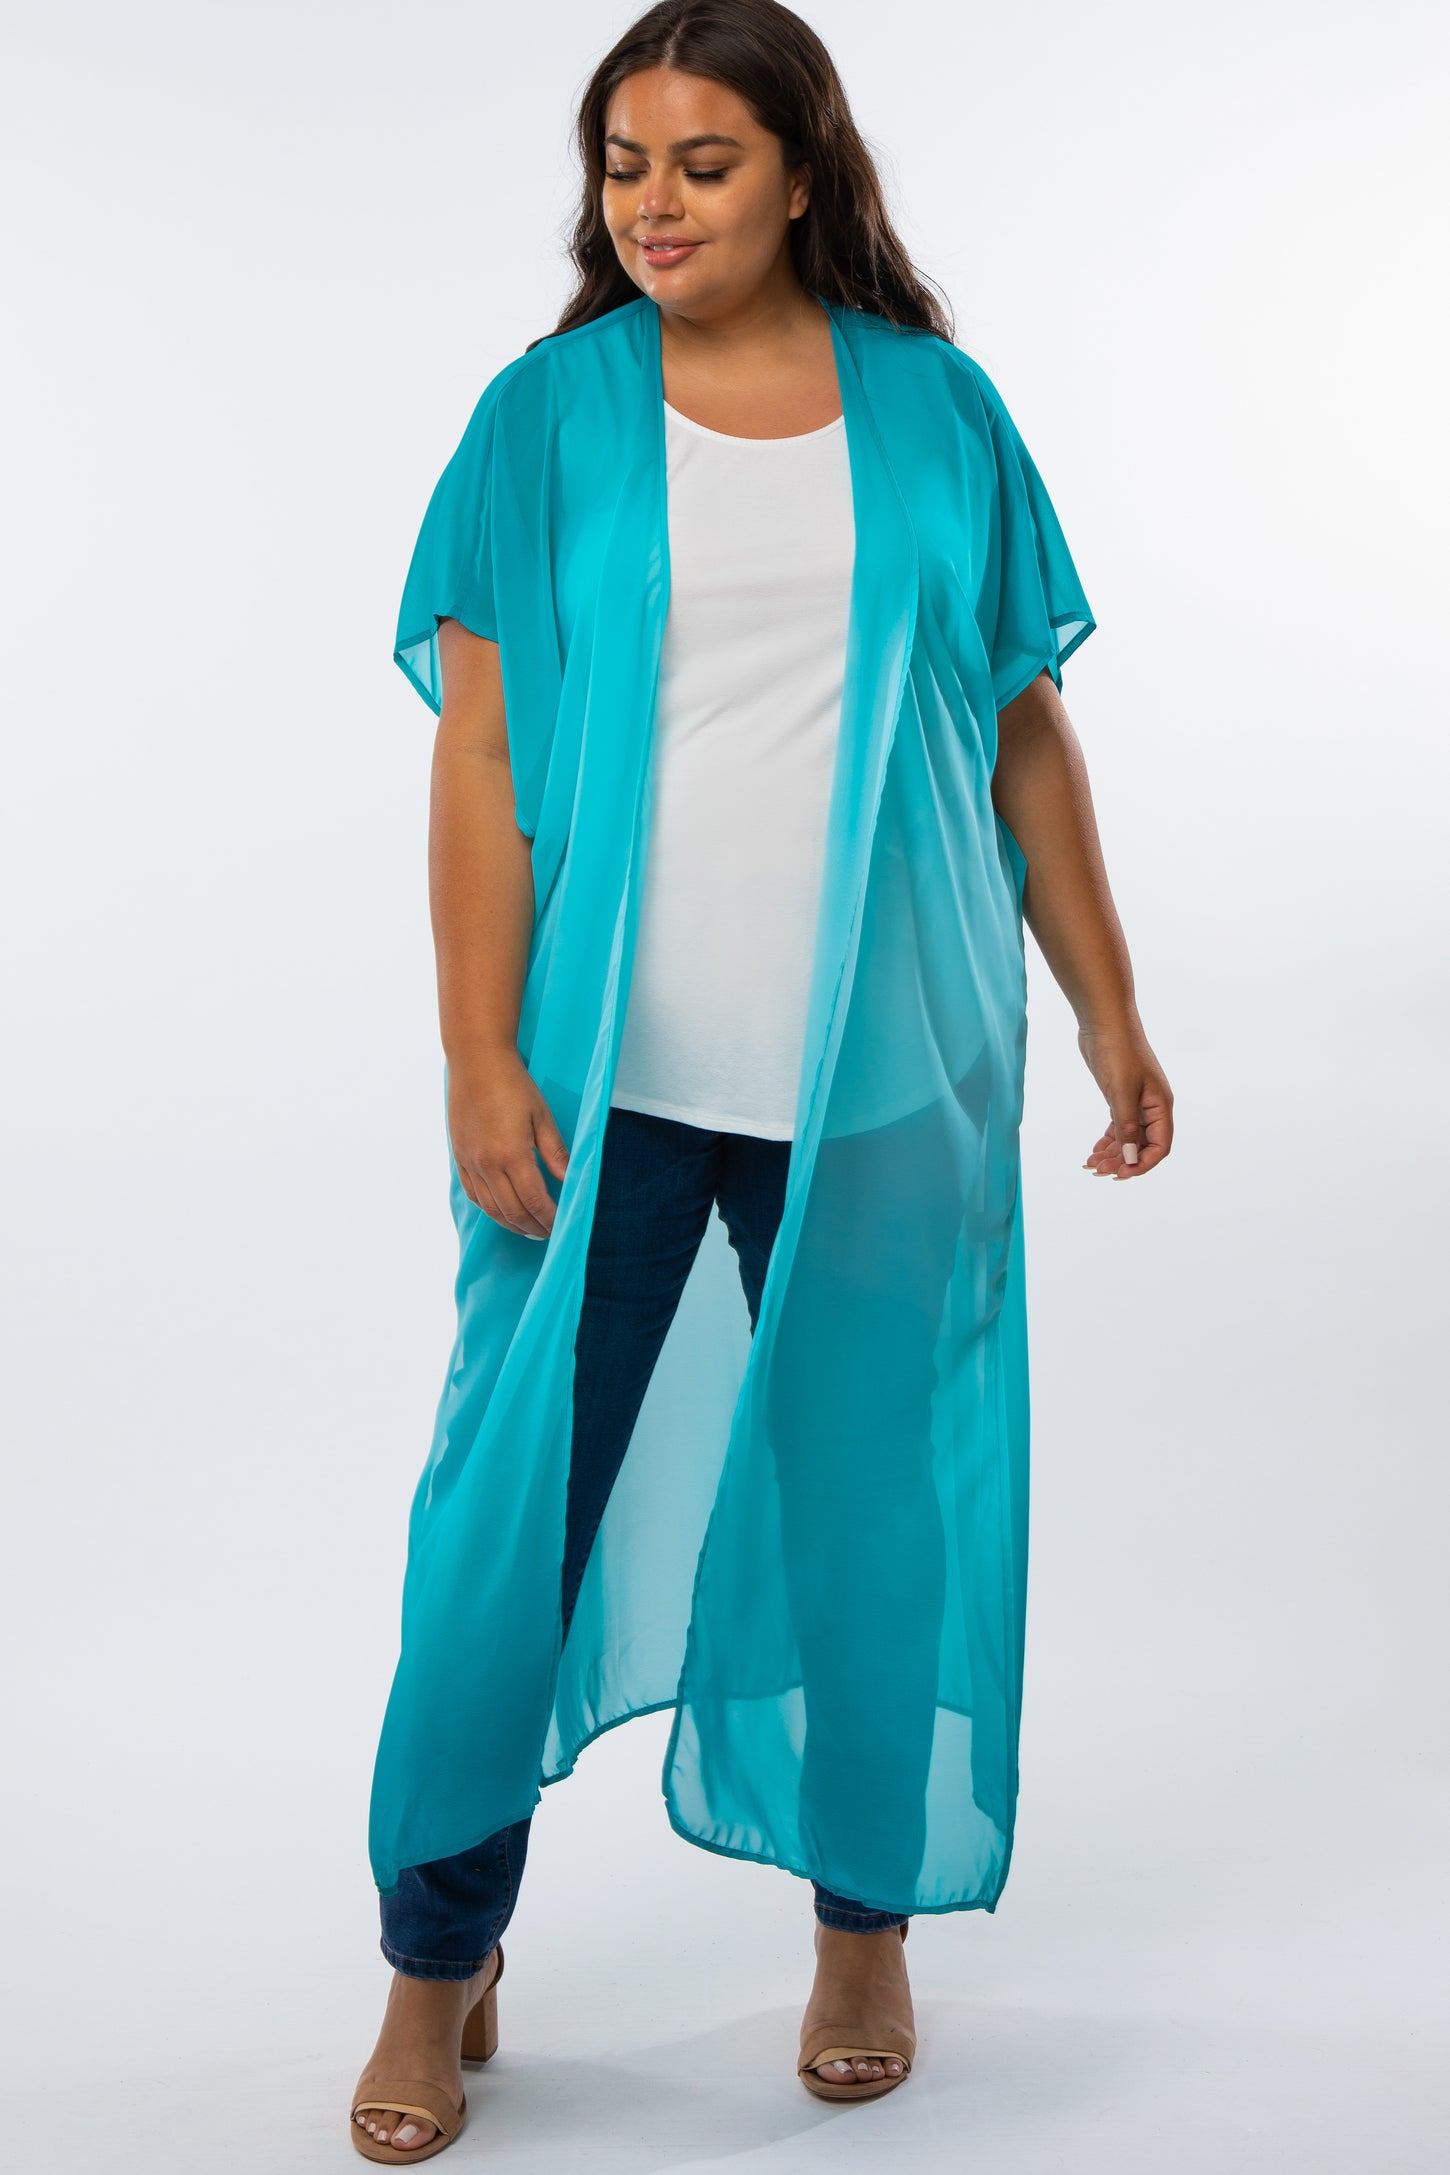 Teal Ombre Chiffon Long Maternity Plus Cover Up